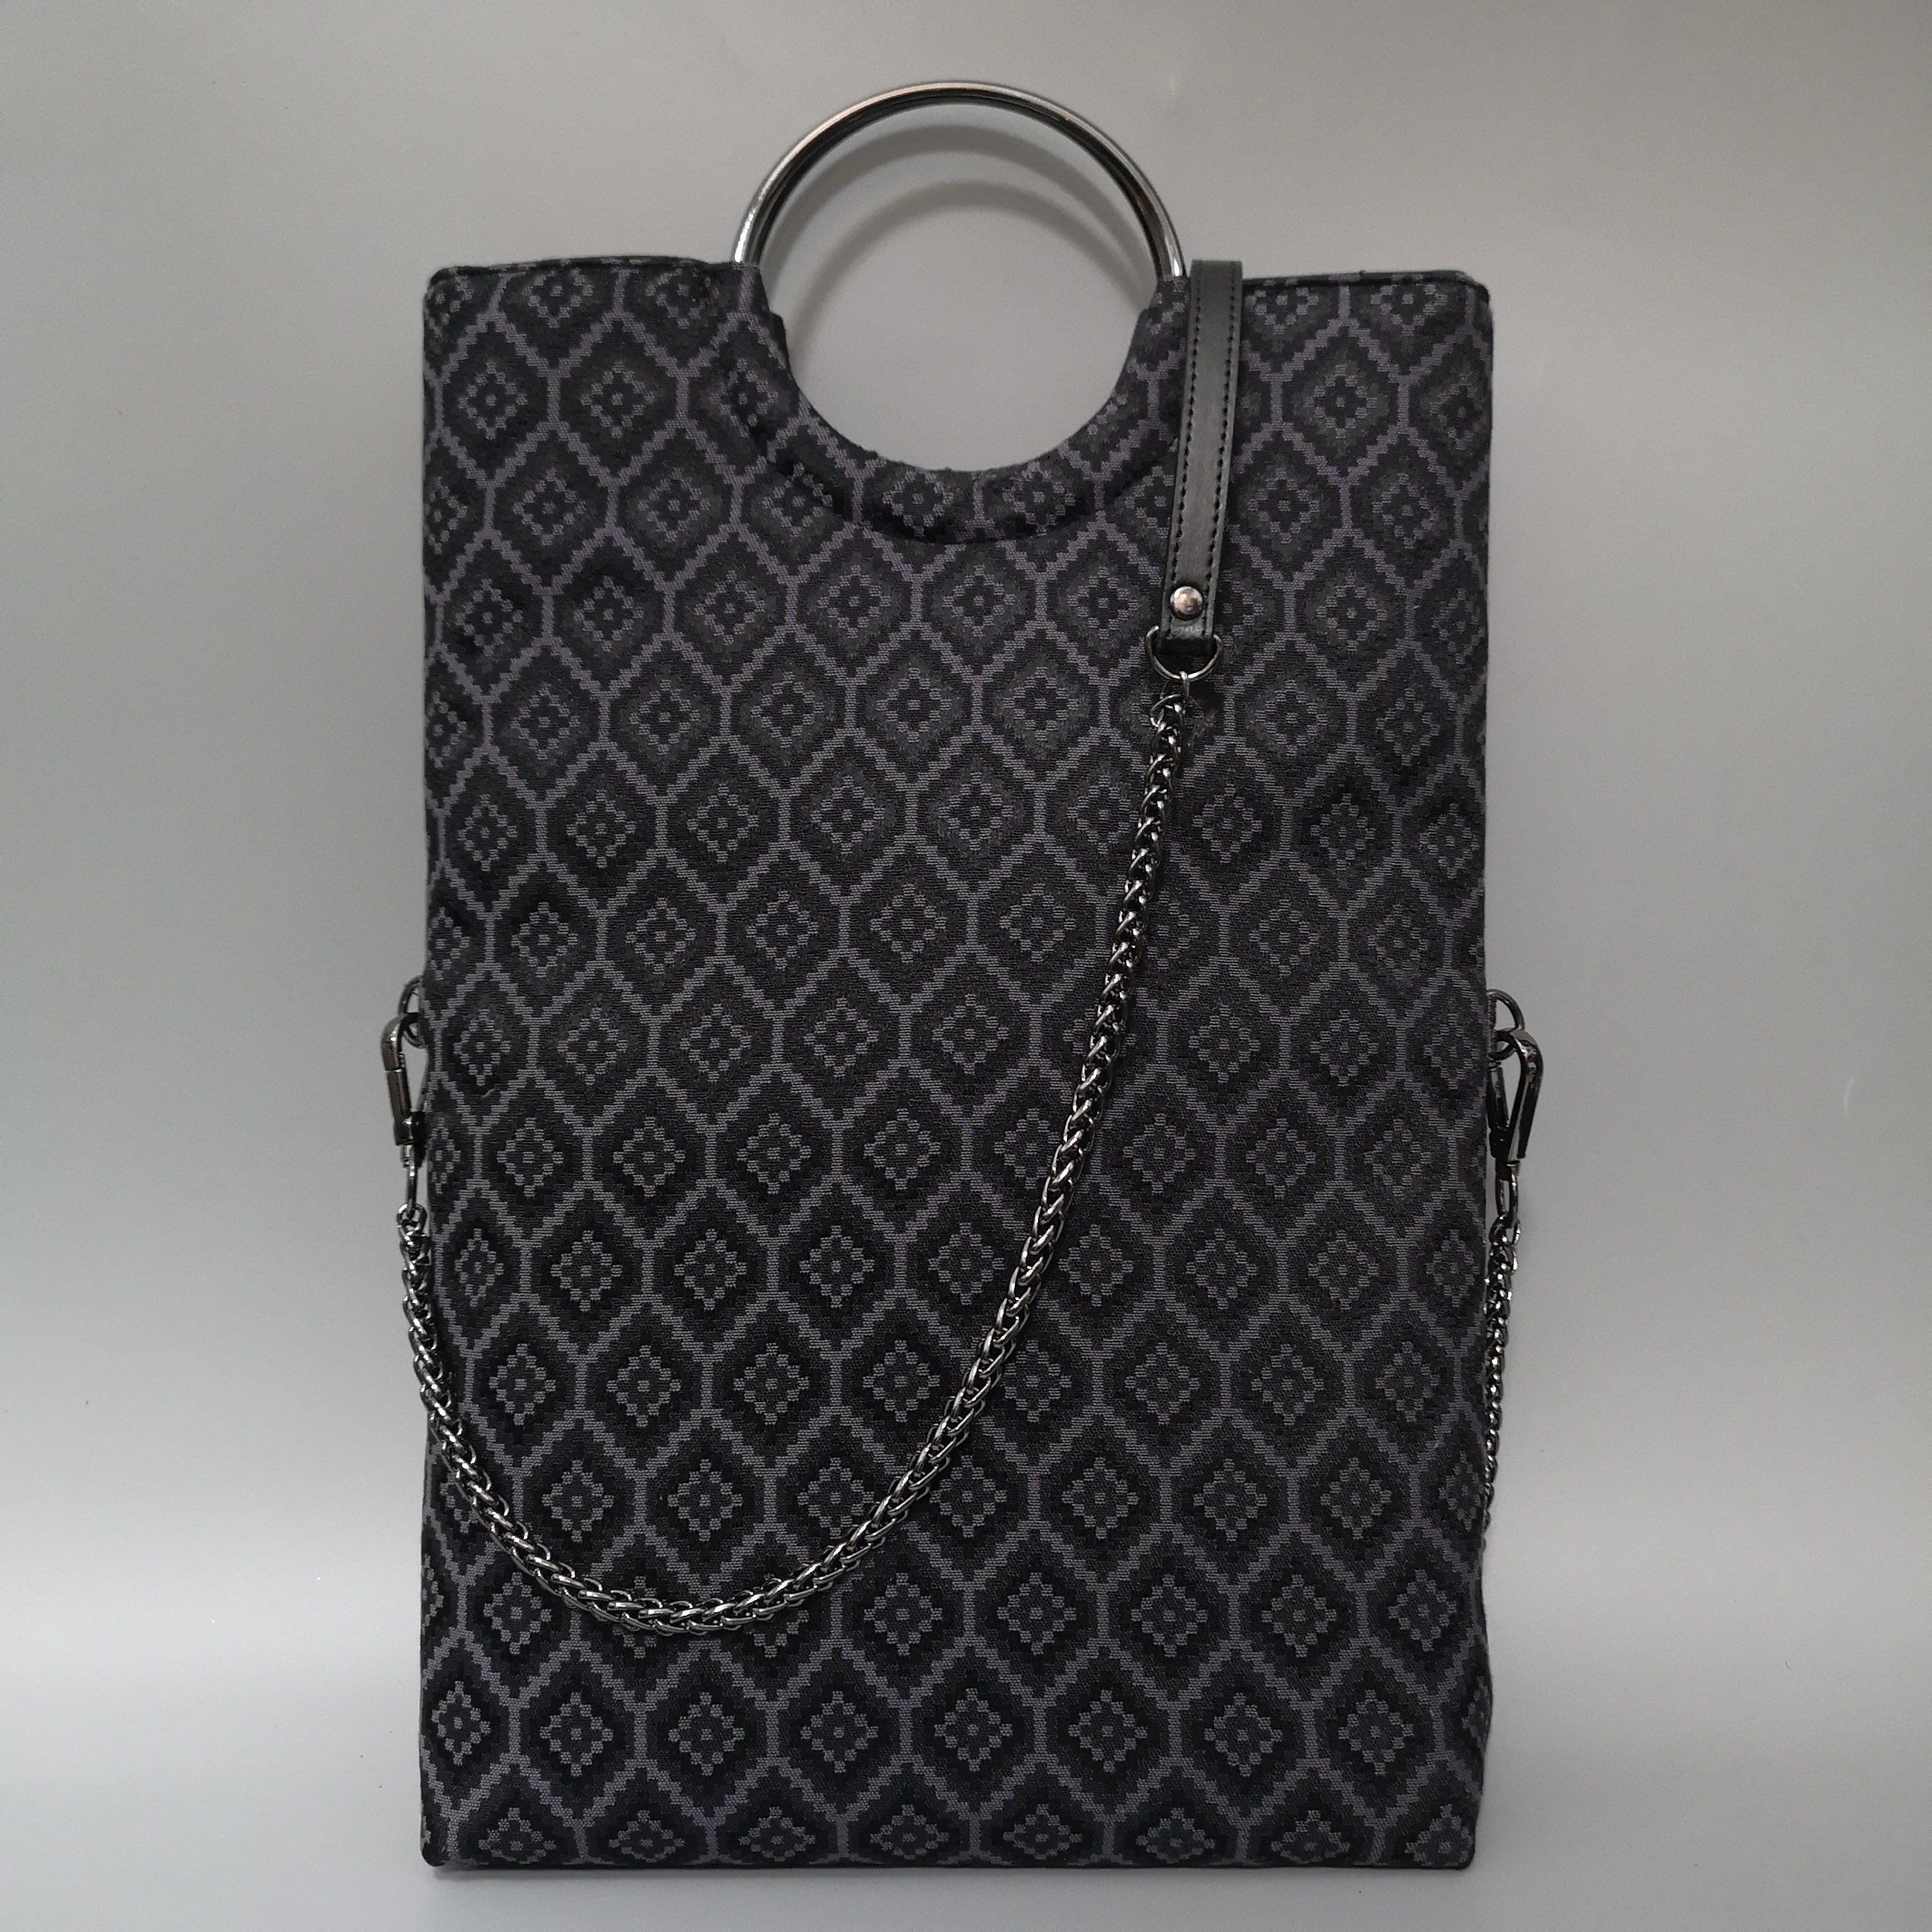 *CTS- Clutch Tote Sling Bag- 1002